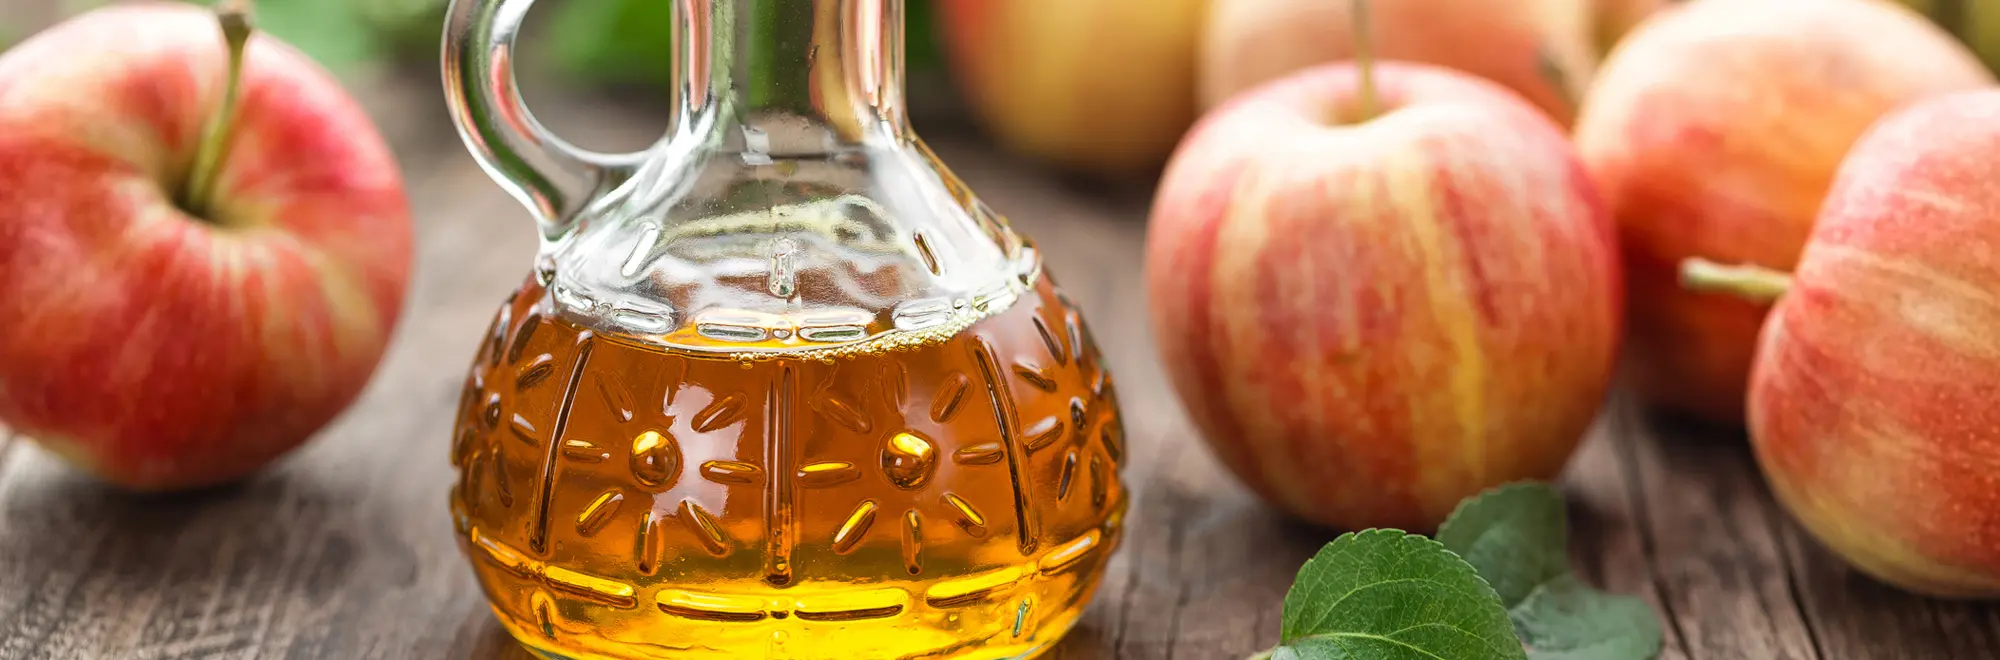 Vinegar is good for your health, do you want to know why?